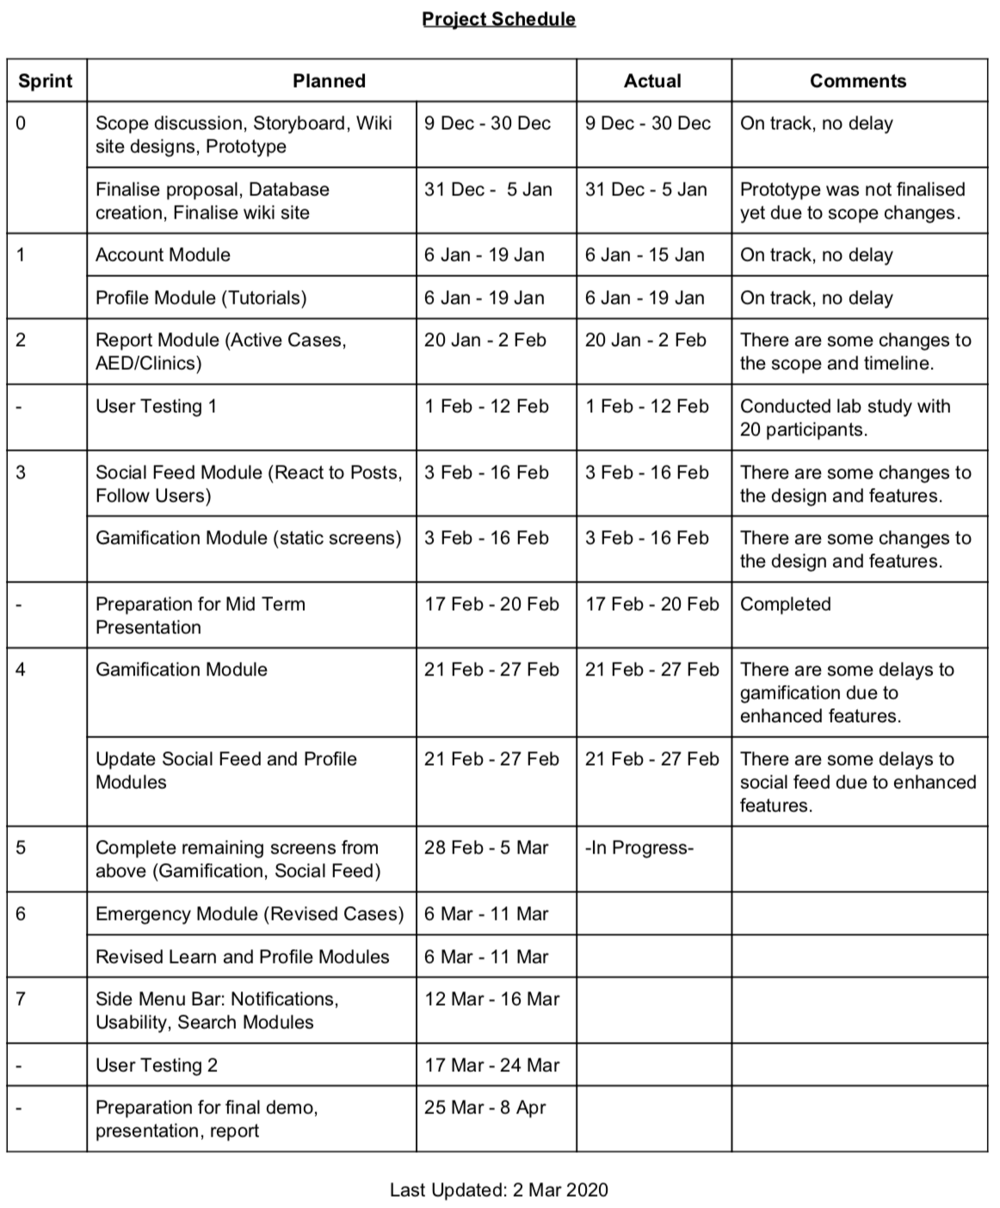 Project schedule on 2 mar.png